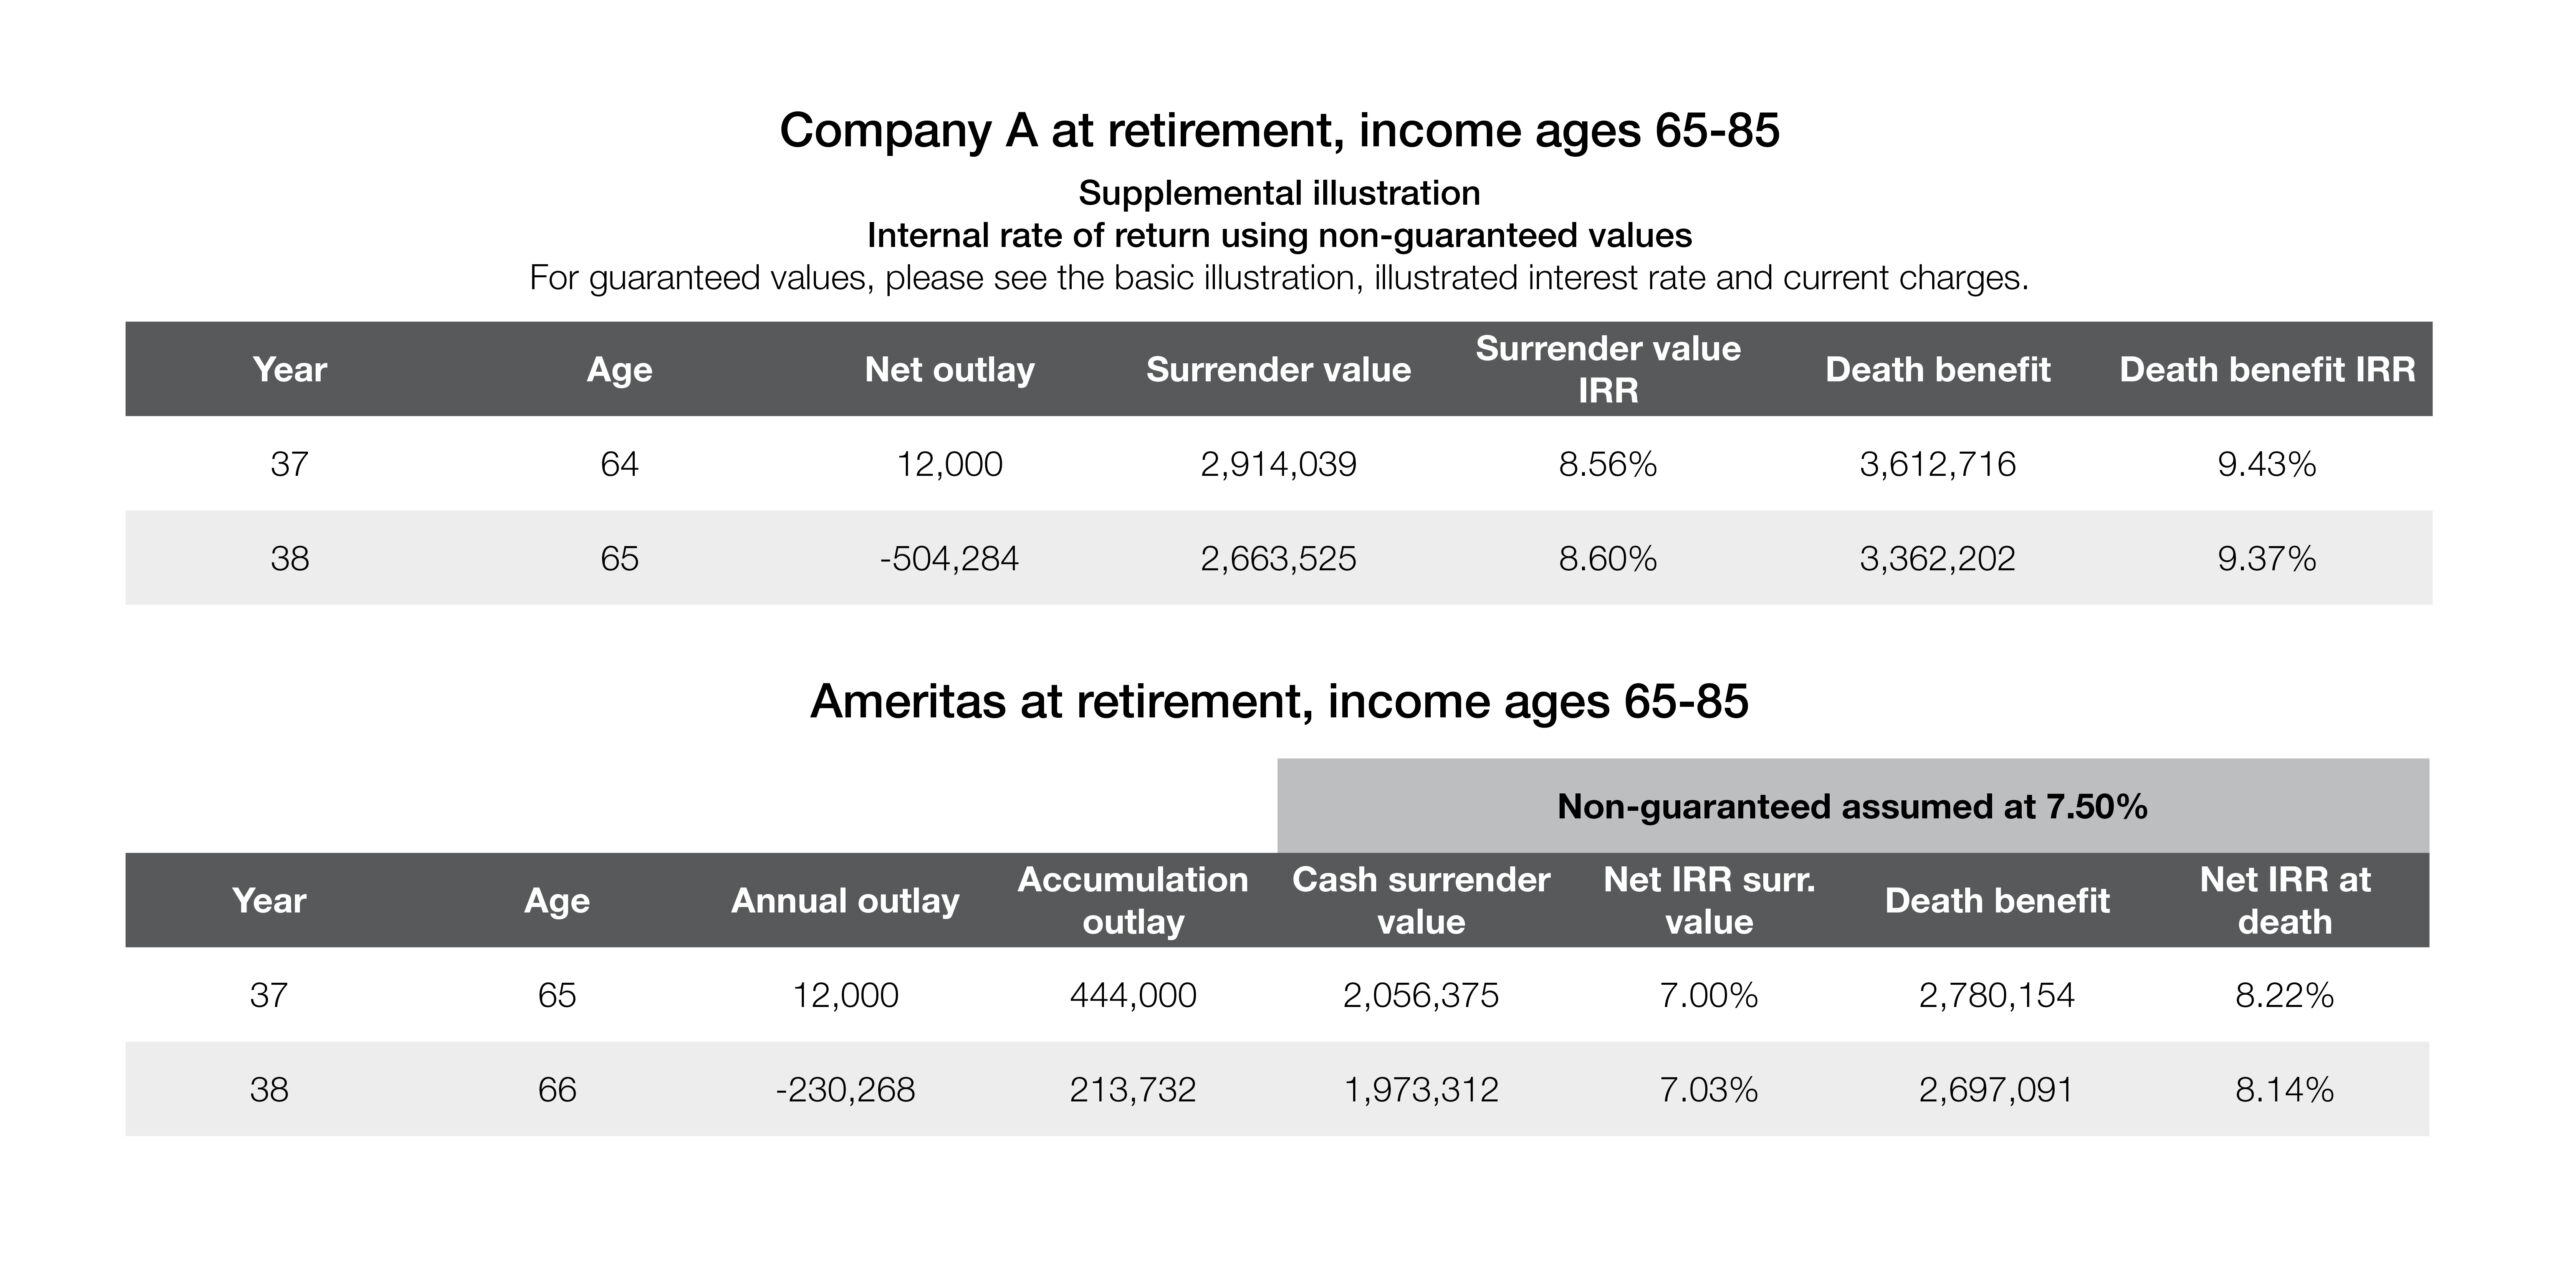 Company A at retirement, income ages 65-85 and Ameritas at retirement, income ages 65-85 chart